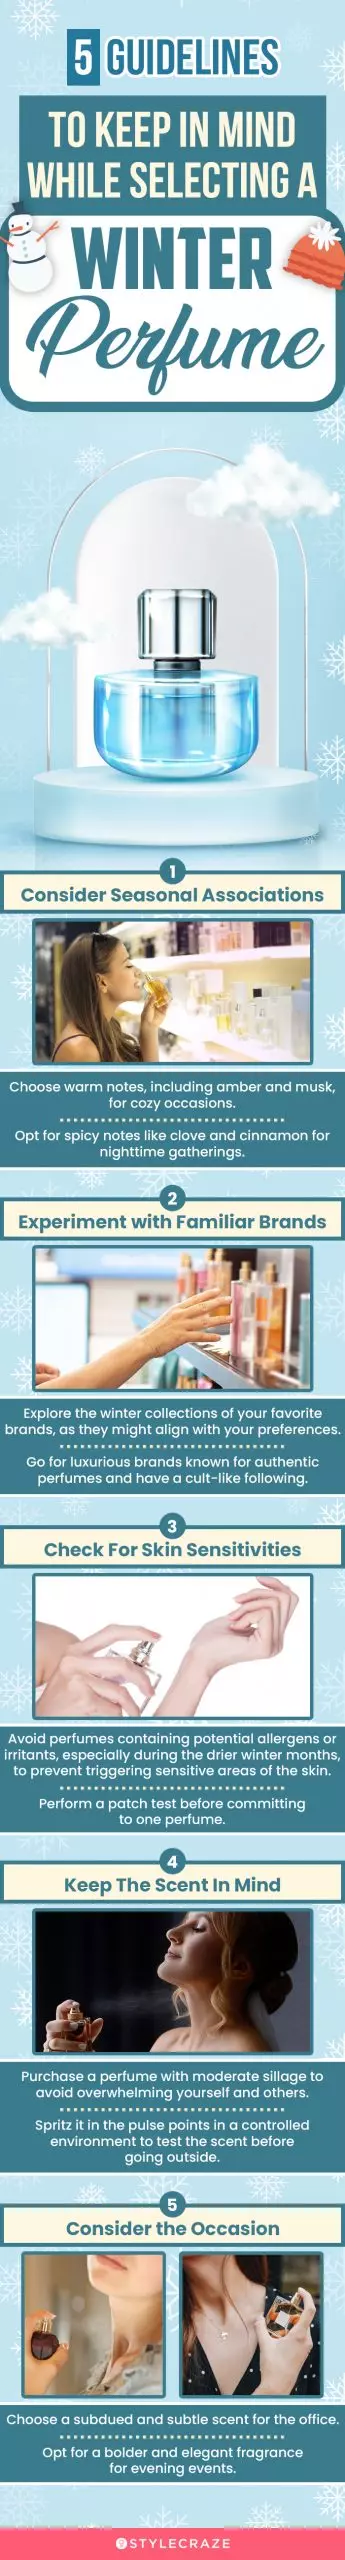 5 Guidelines To Keep In Mind While Selecting A Winter Perfume (infographic)